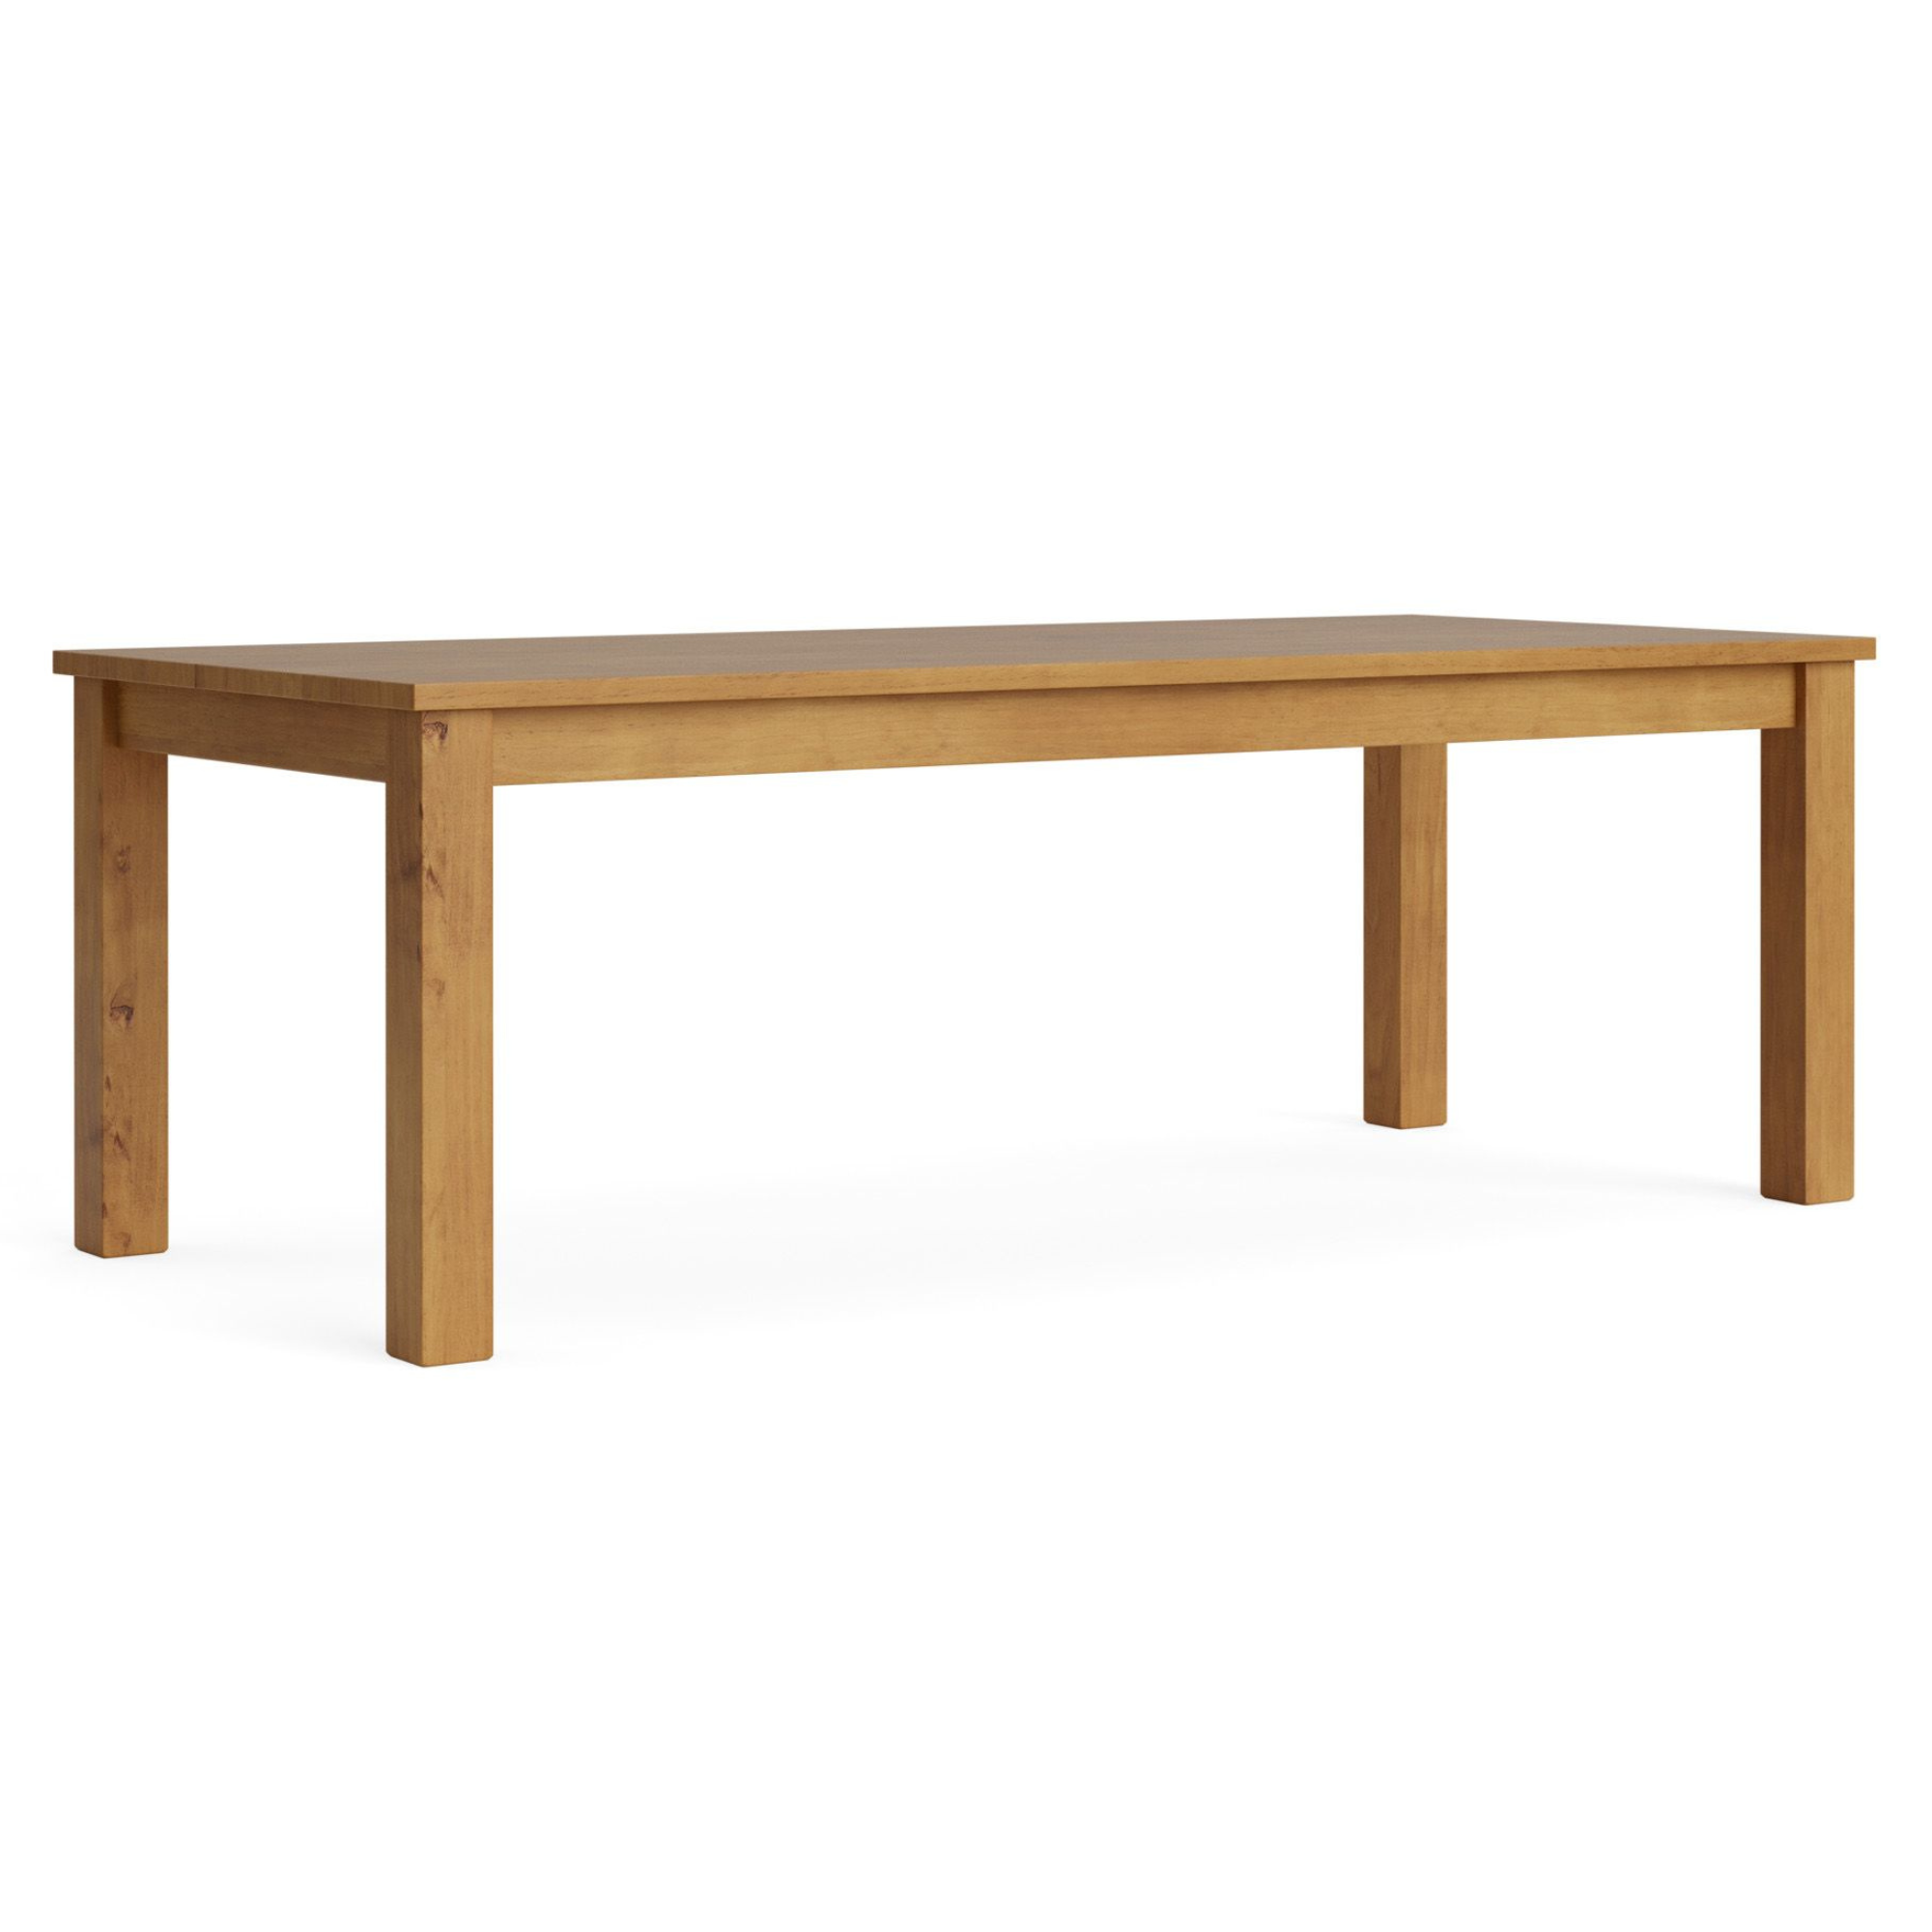 CHARLTON 2200 DINING TABLE | NZ MADE